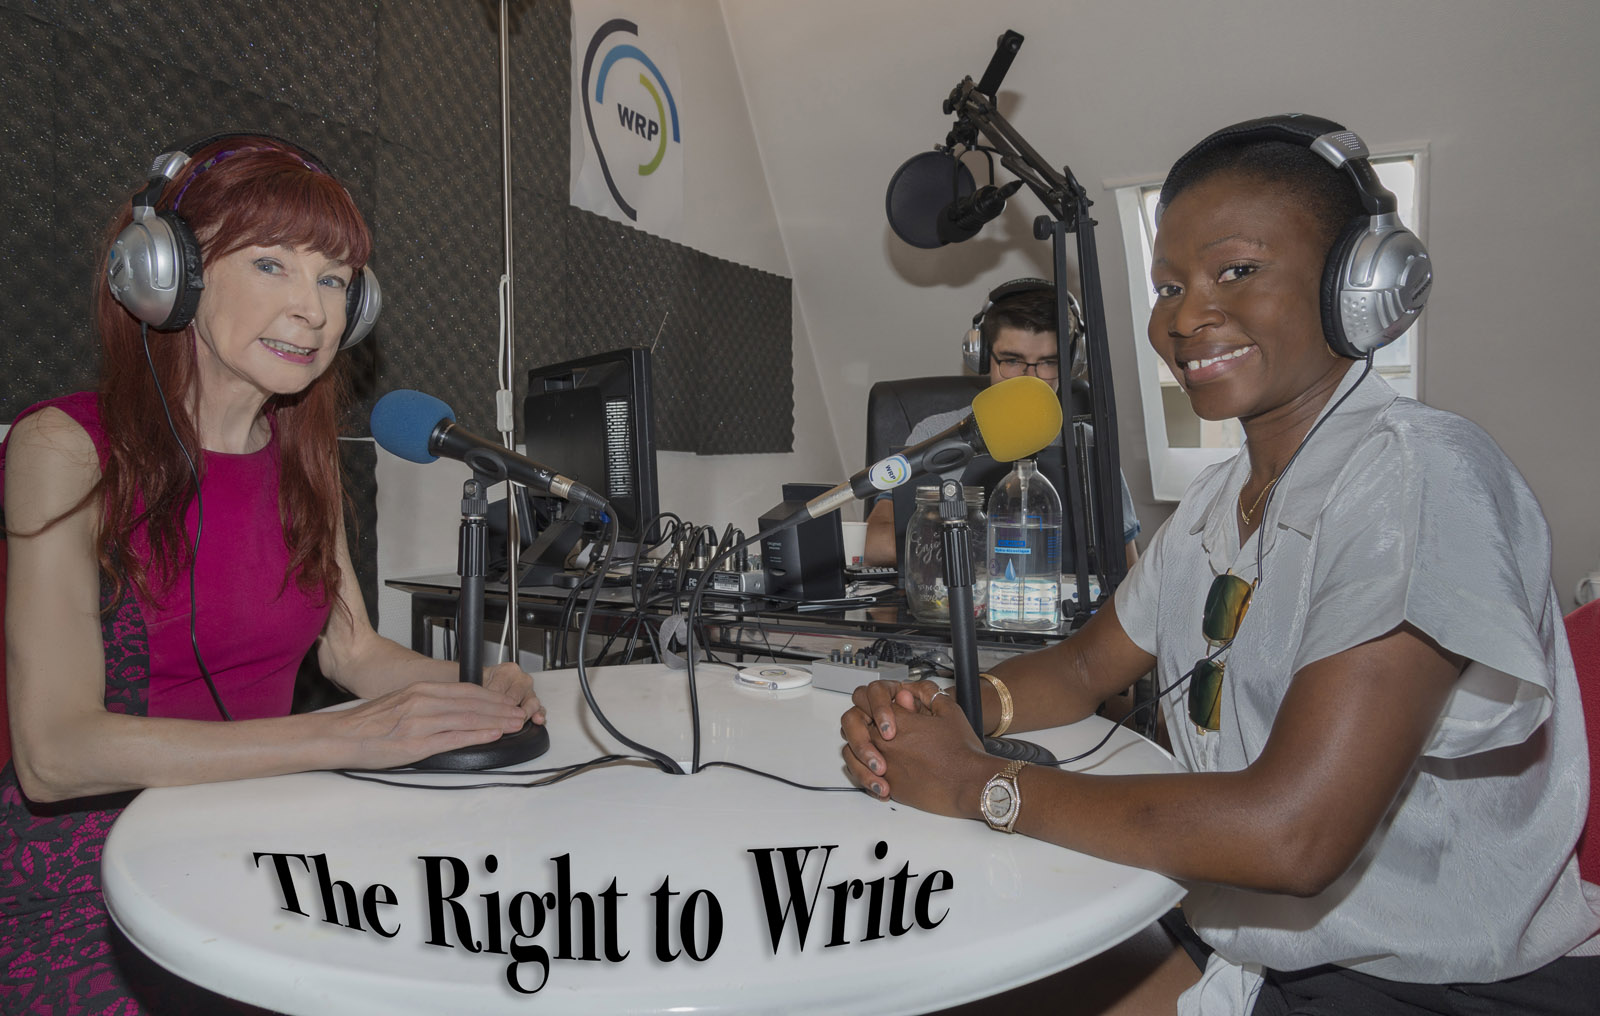 Maria D’Arcy with Tendayi Olga Chirawu recording an interview for “The Right to Write” in the studios of World Radio Paris.